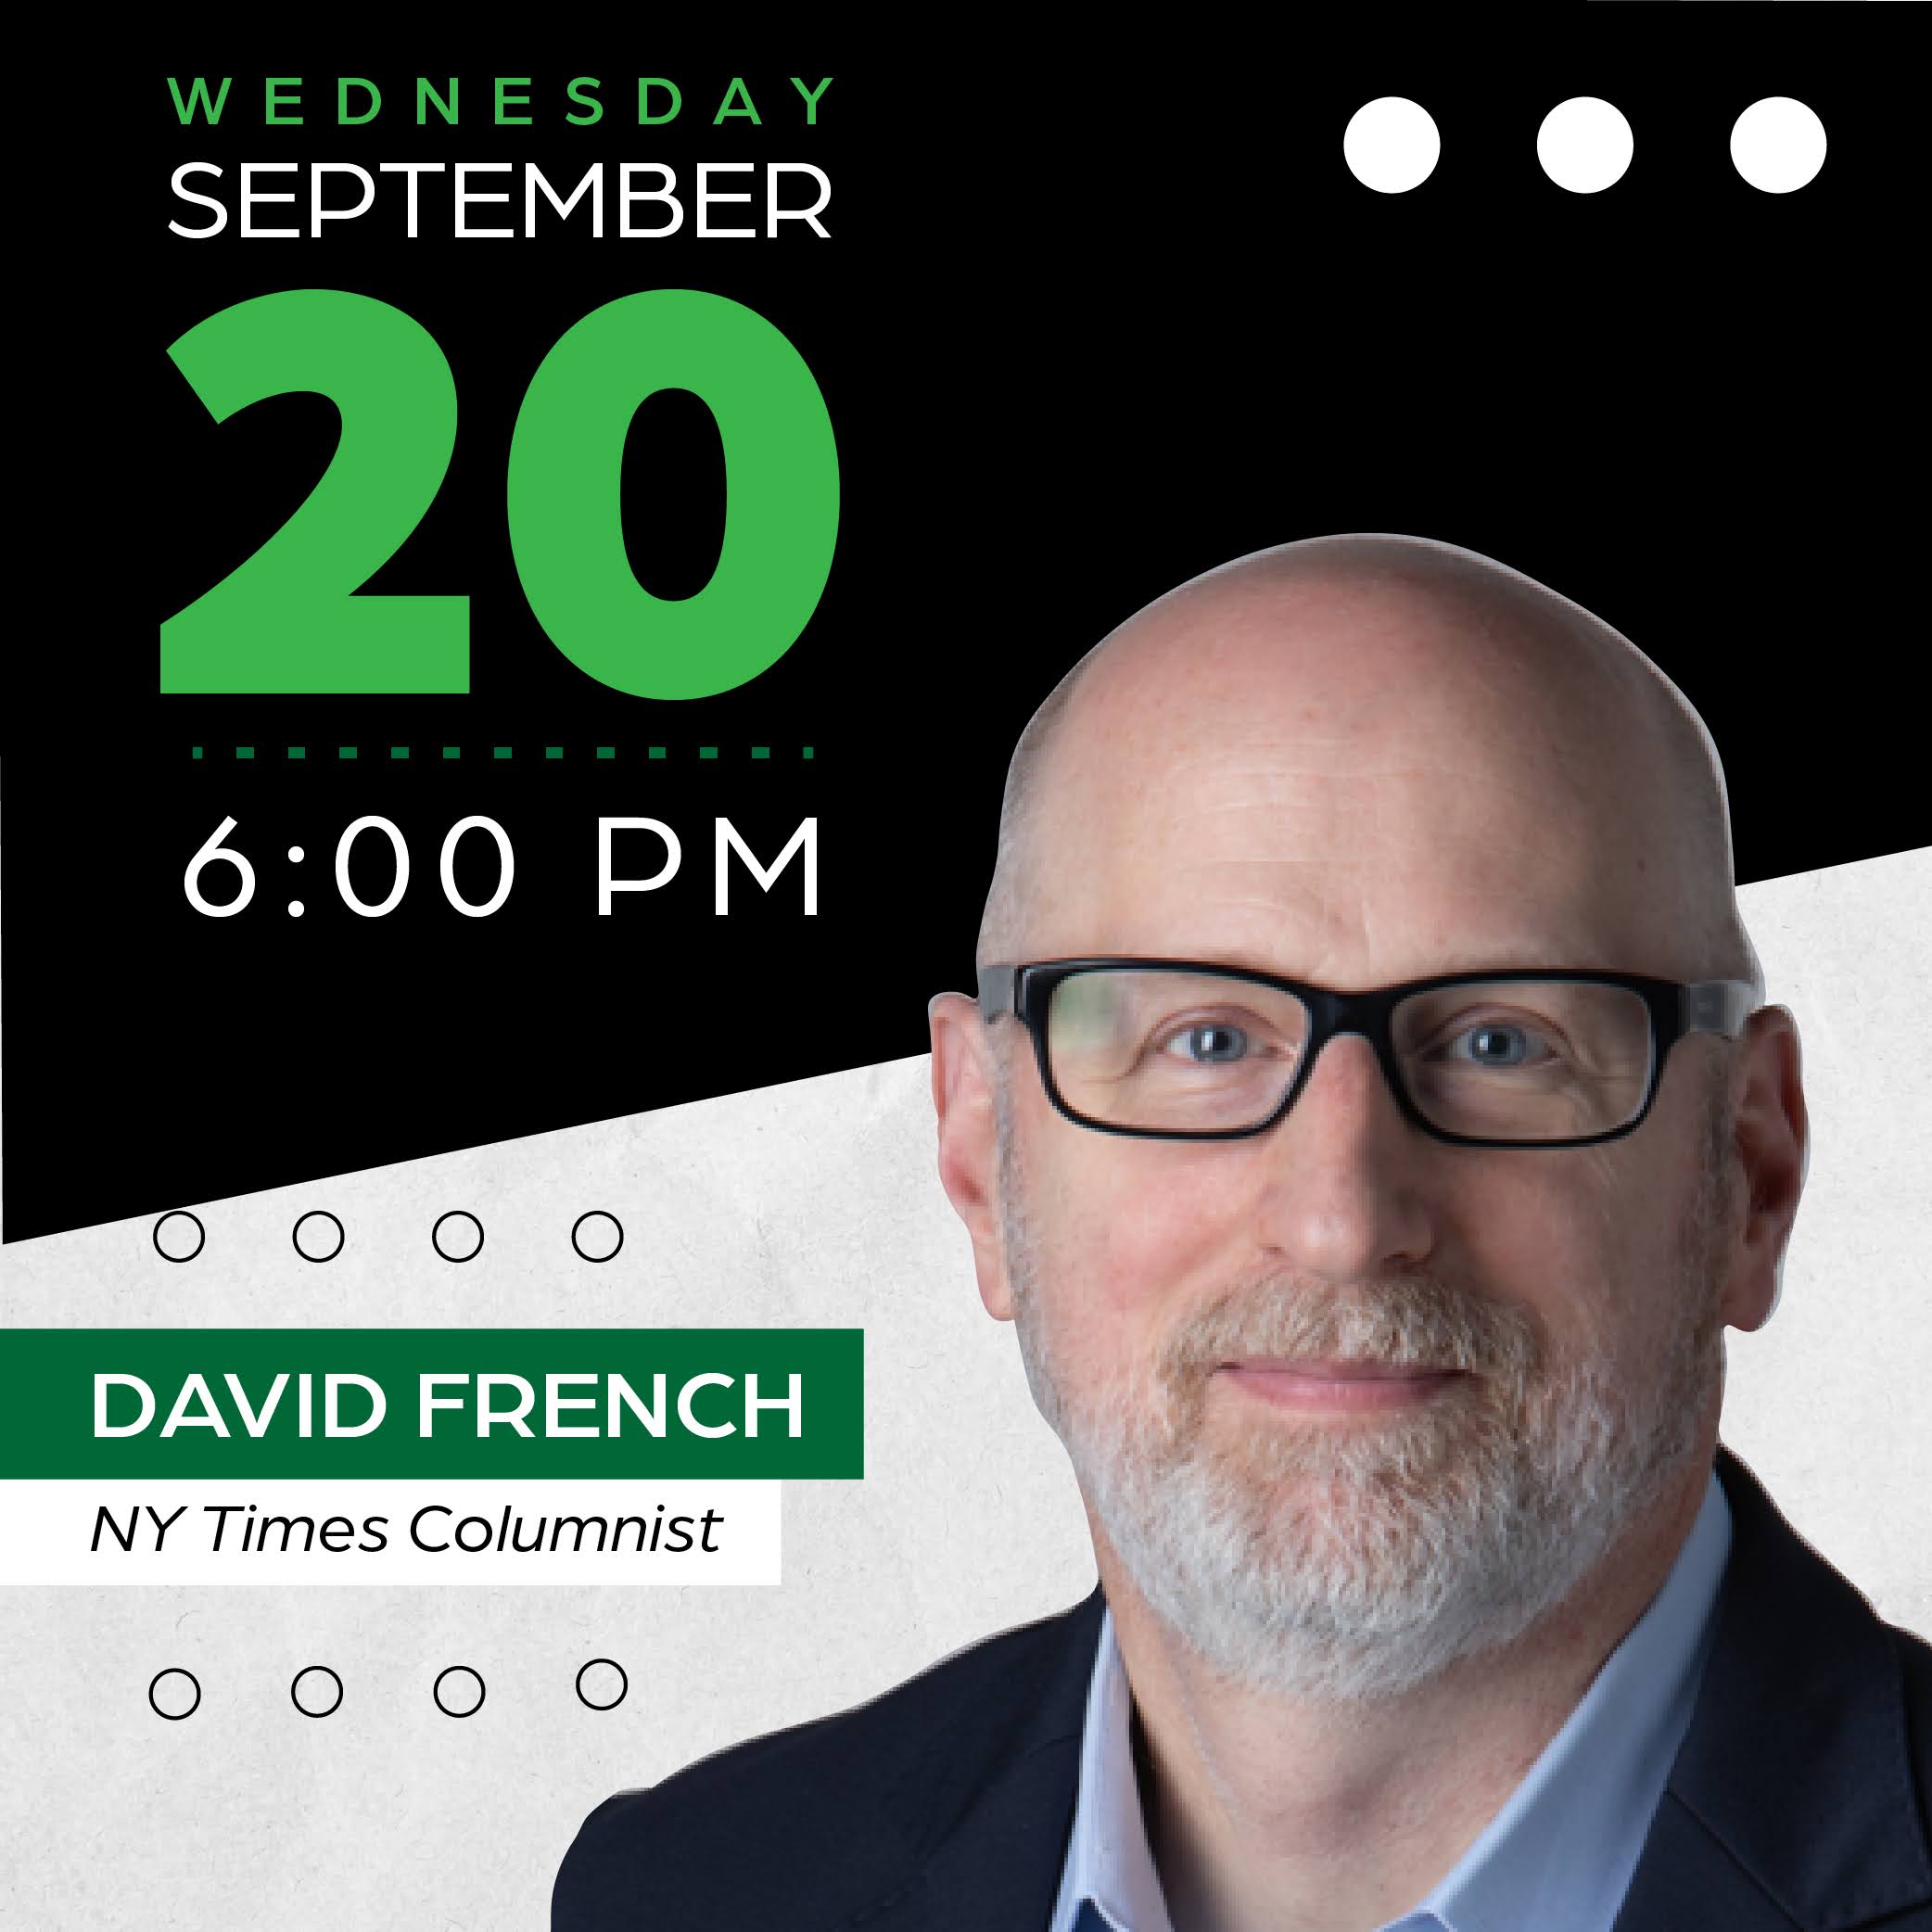 Photo of David French with event details